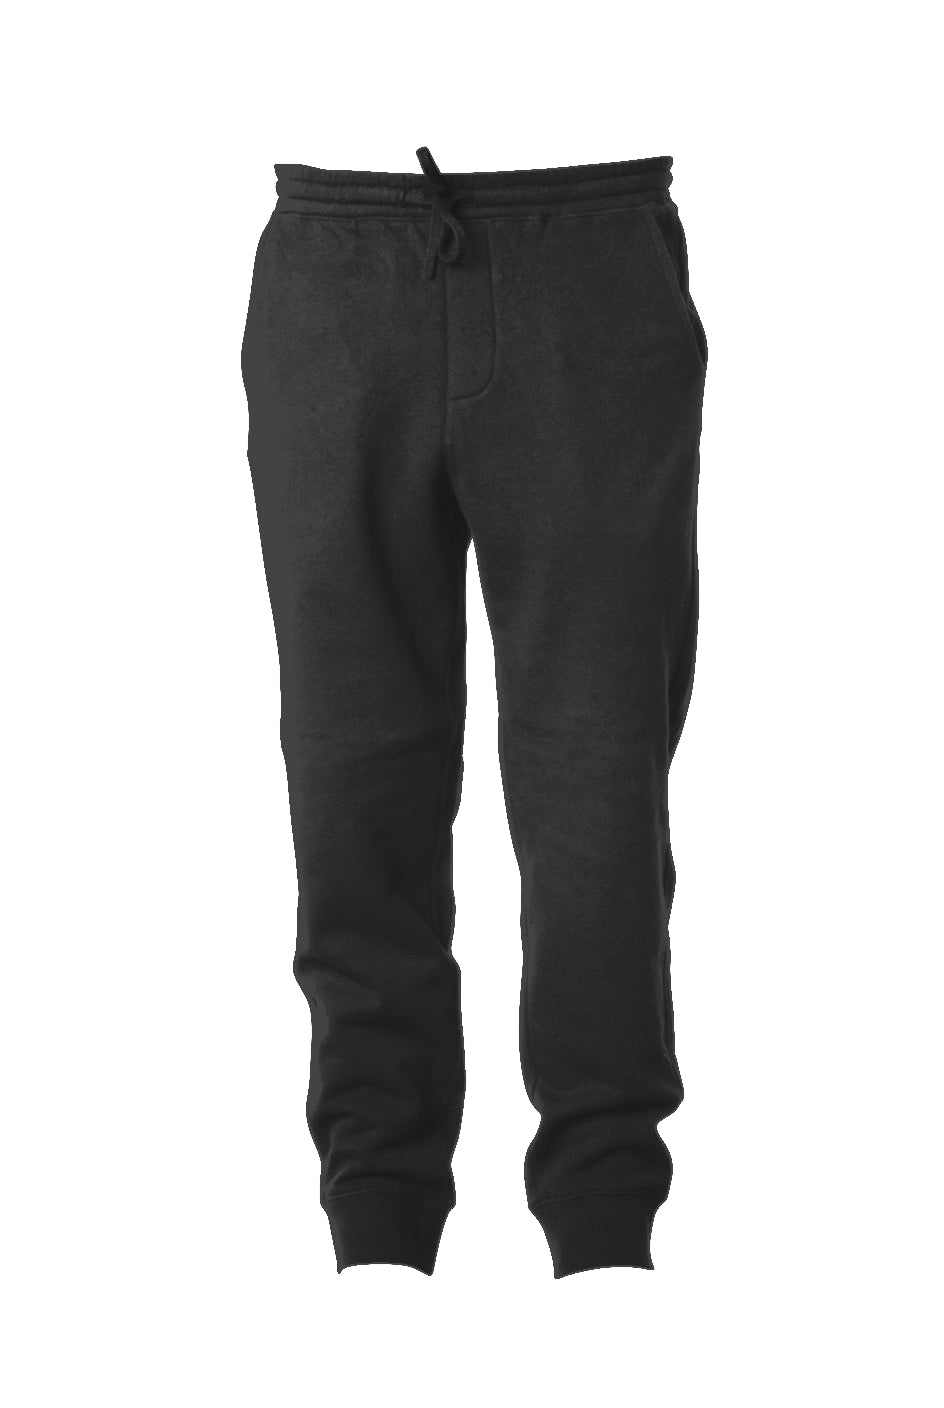 Youth Lightweight Special Blend Black Sweatpants - Youth Lightweight Special Blend Sweatpants - Apliiq - Dragon Foxx™ Youth Lightweight Special Blend Black Sweatpants - APQ-4417415S6A0 - s - Black - Black Youth Sweatpants - Dragon Foxx™ - Dragon Foxx™ Special Blend Black Sweatpants